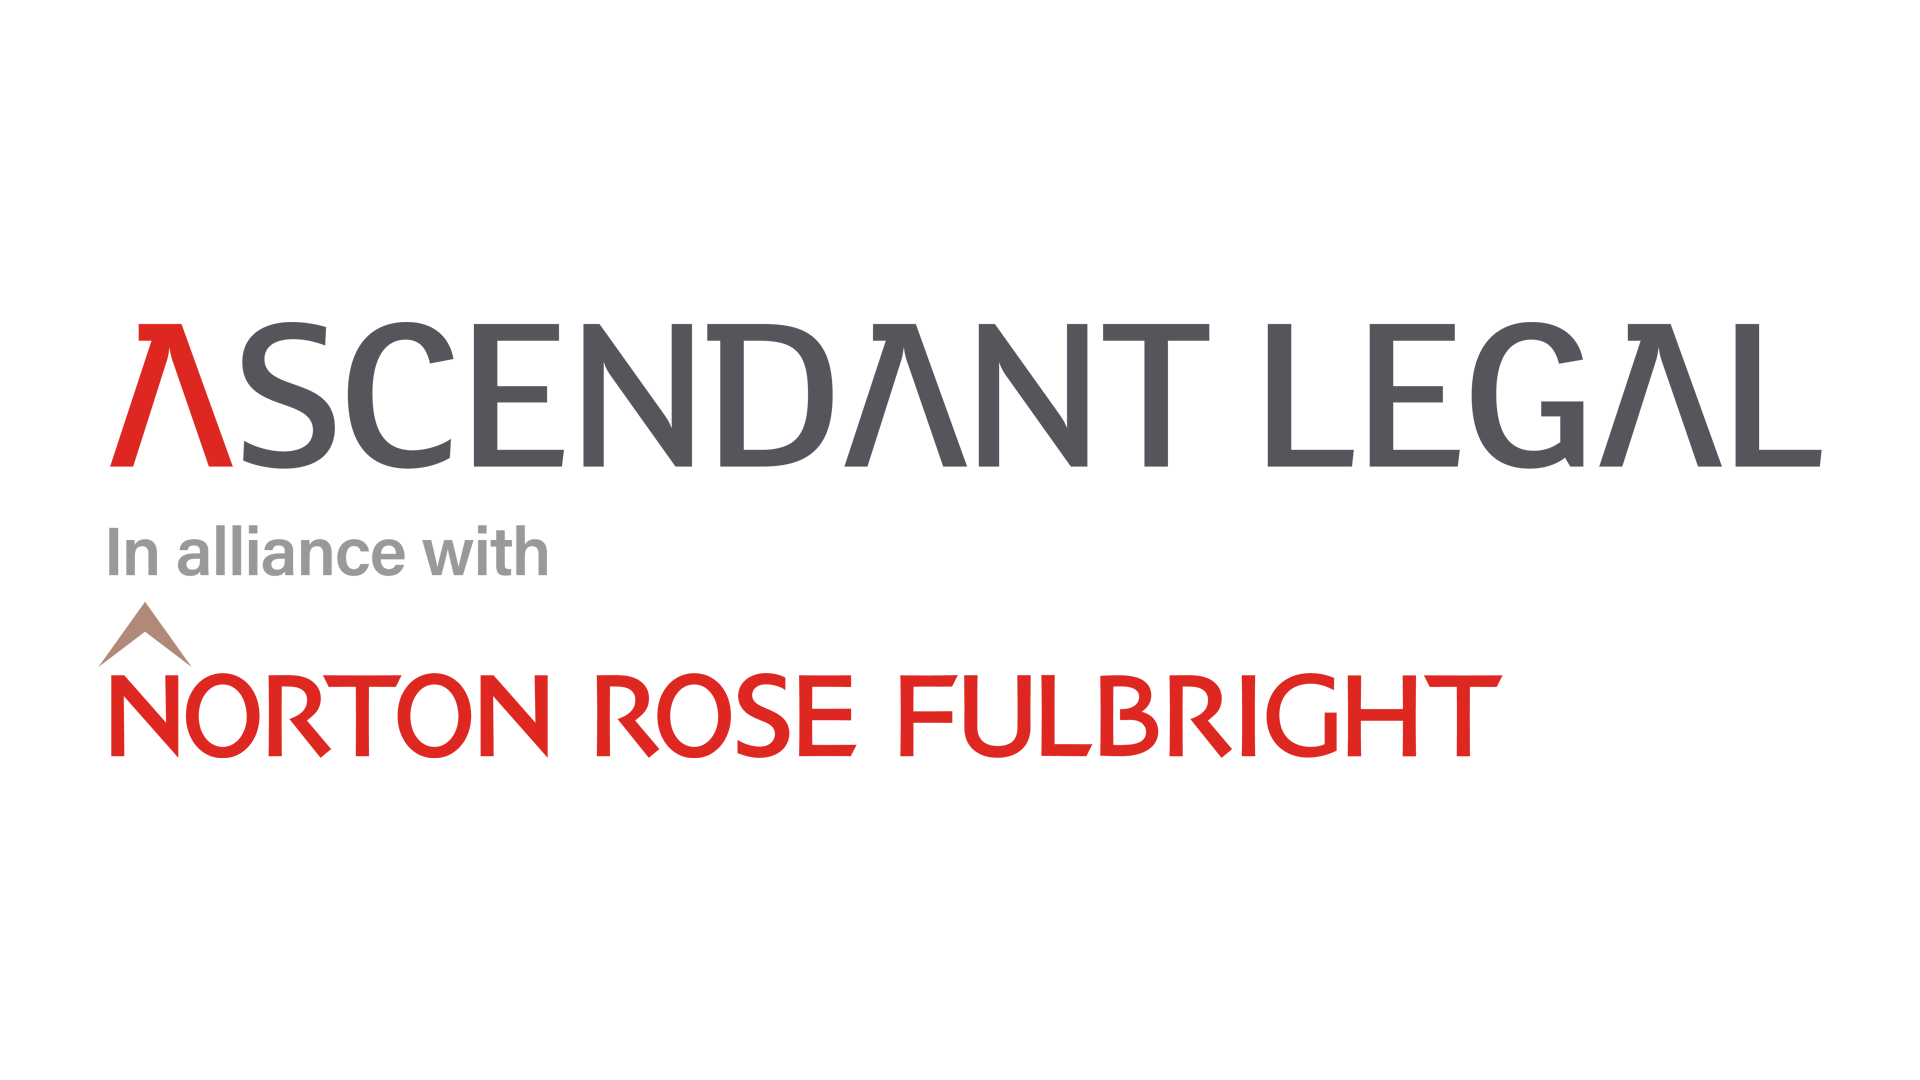 Ascendant Legal and Norton Rose Fulbright are registered as a Formal Law Alliance